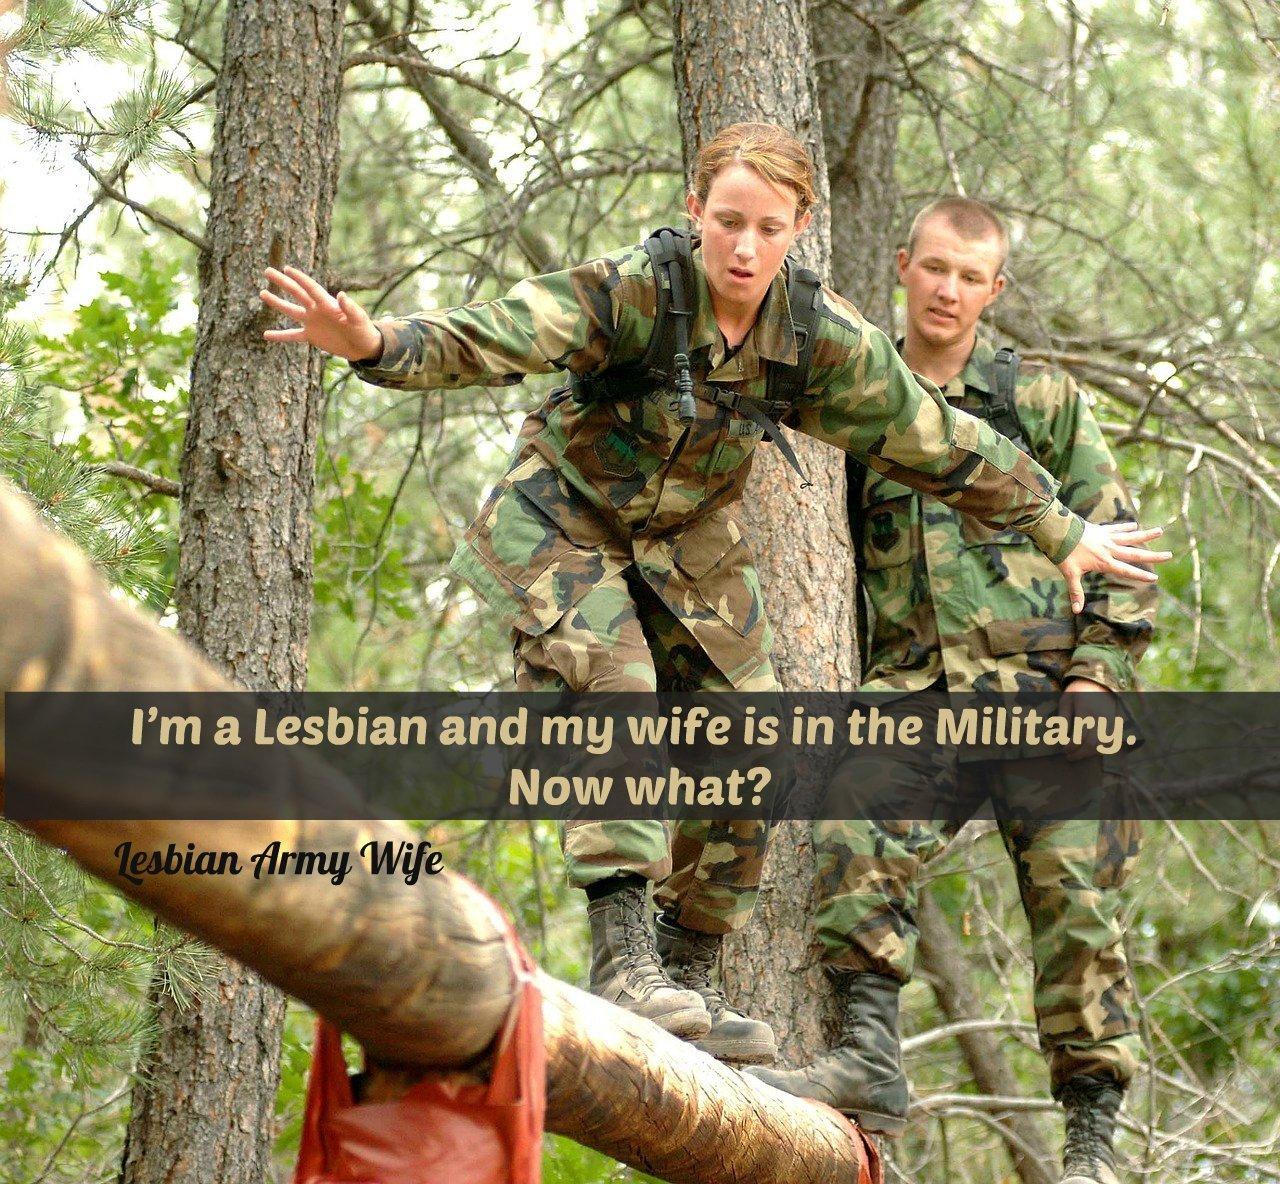 Army spouses and lesbian sex